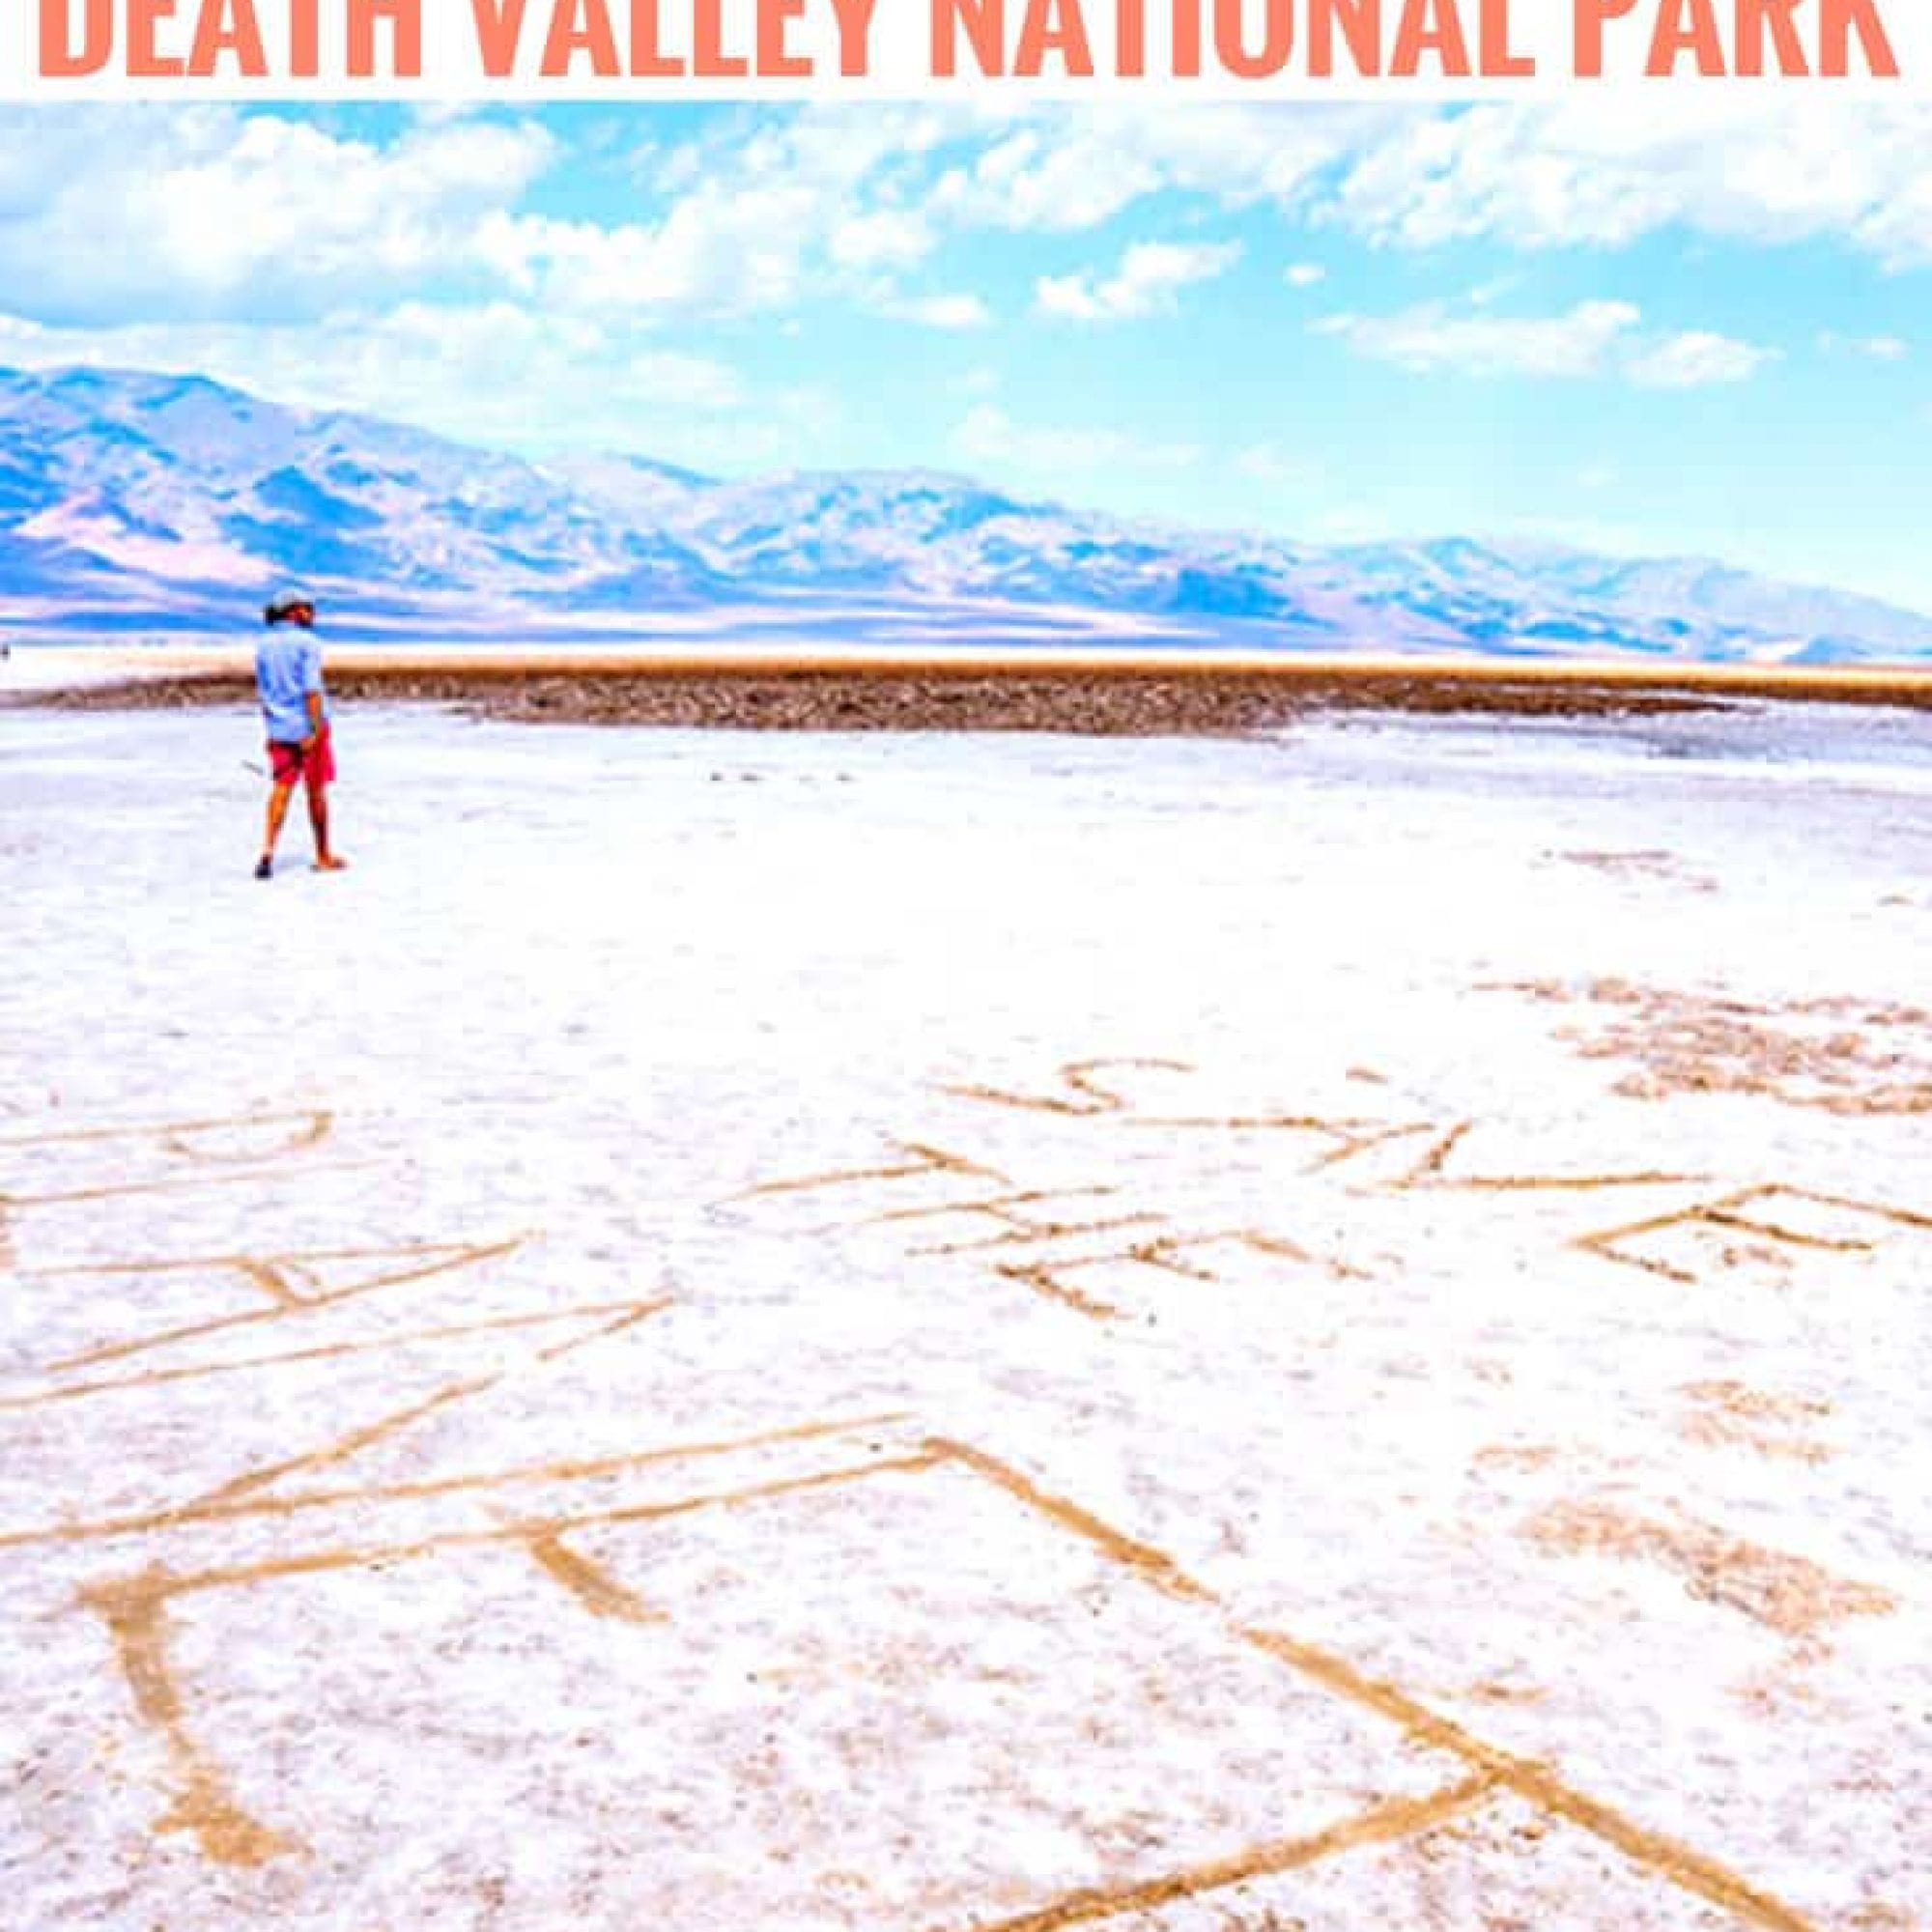 Things to do in Death Valley